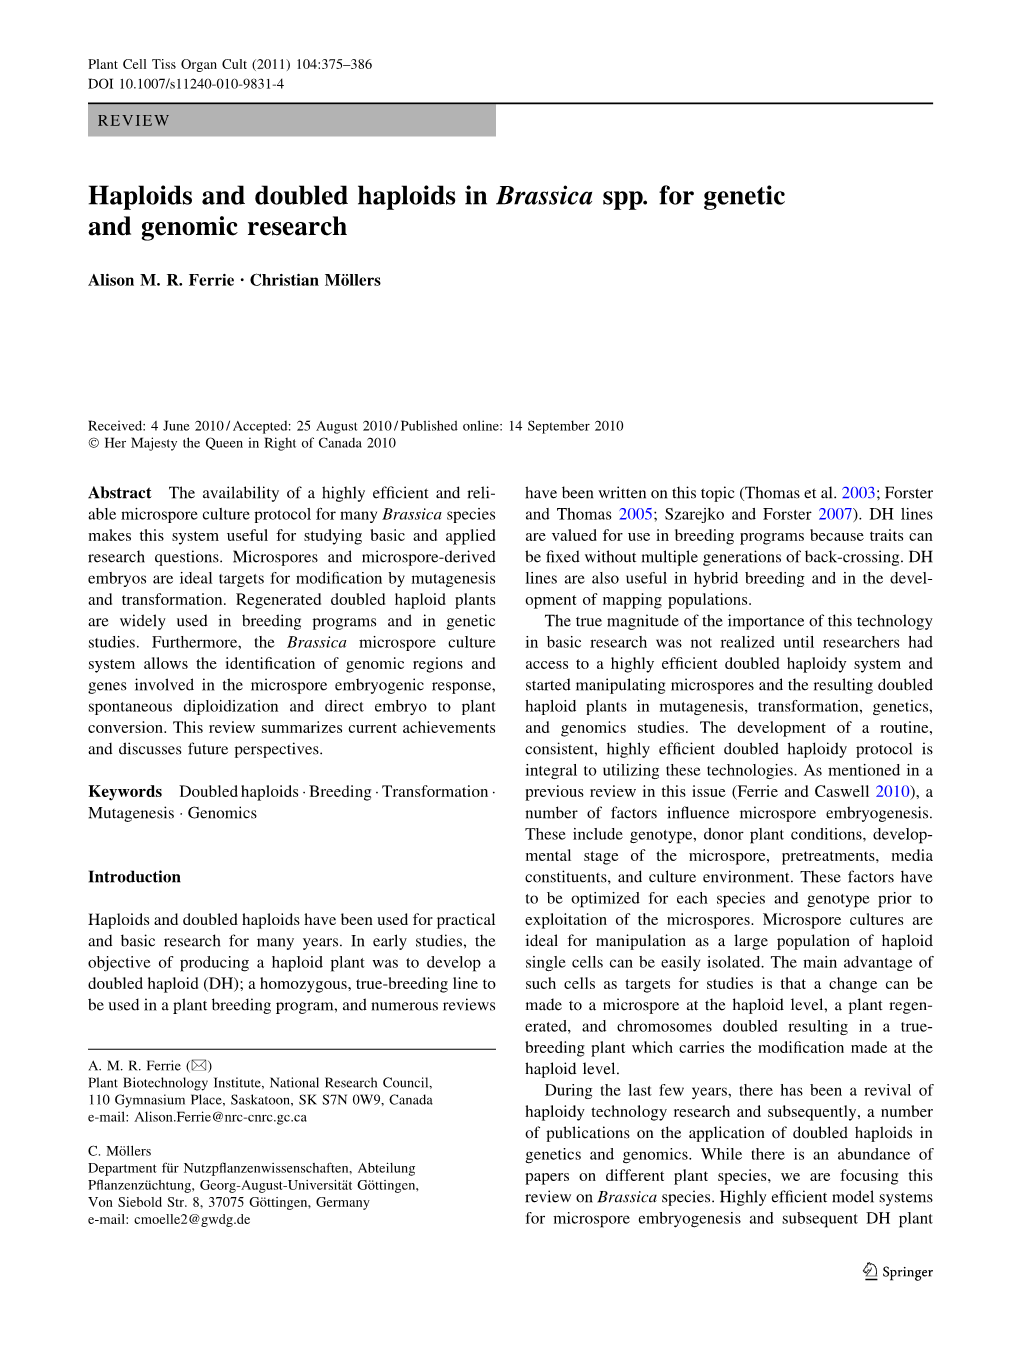 Haploids and Doubled Haploids in Brassica Spp. for Genetic and Genomic Research